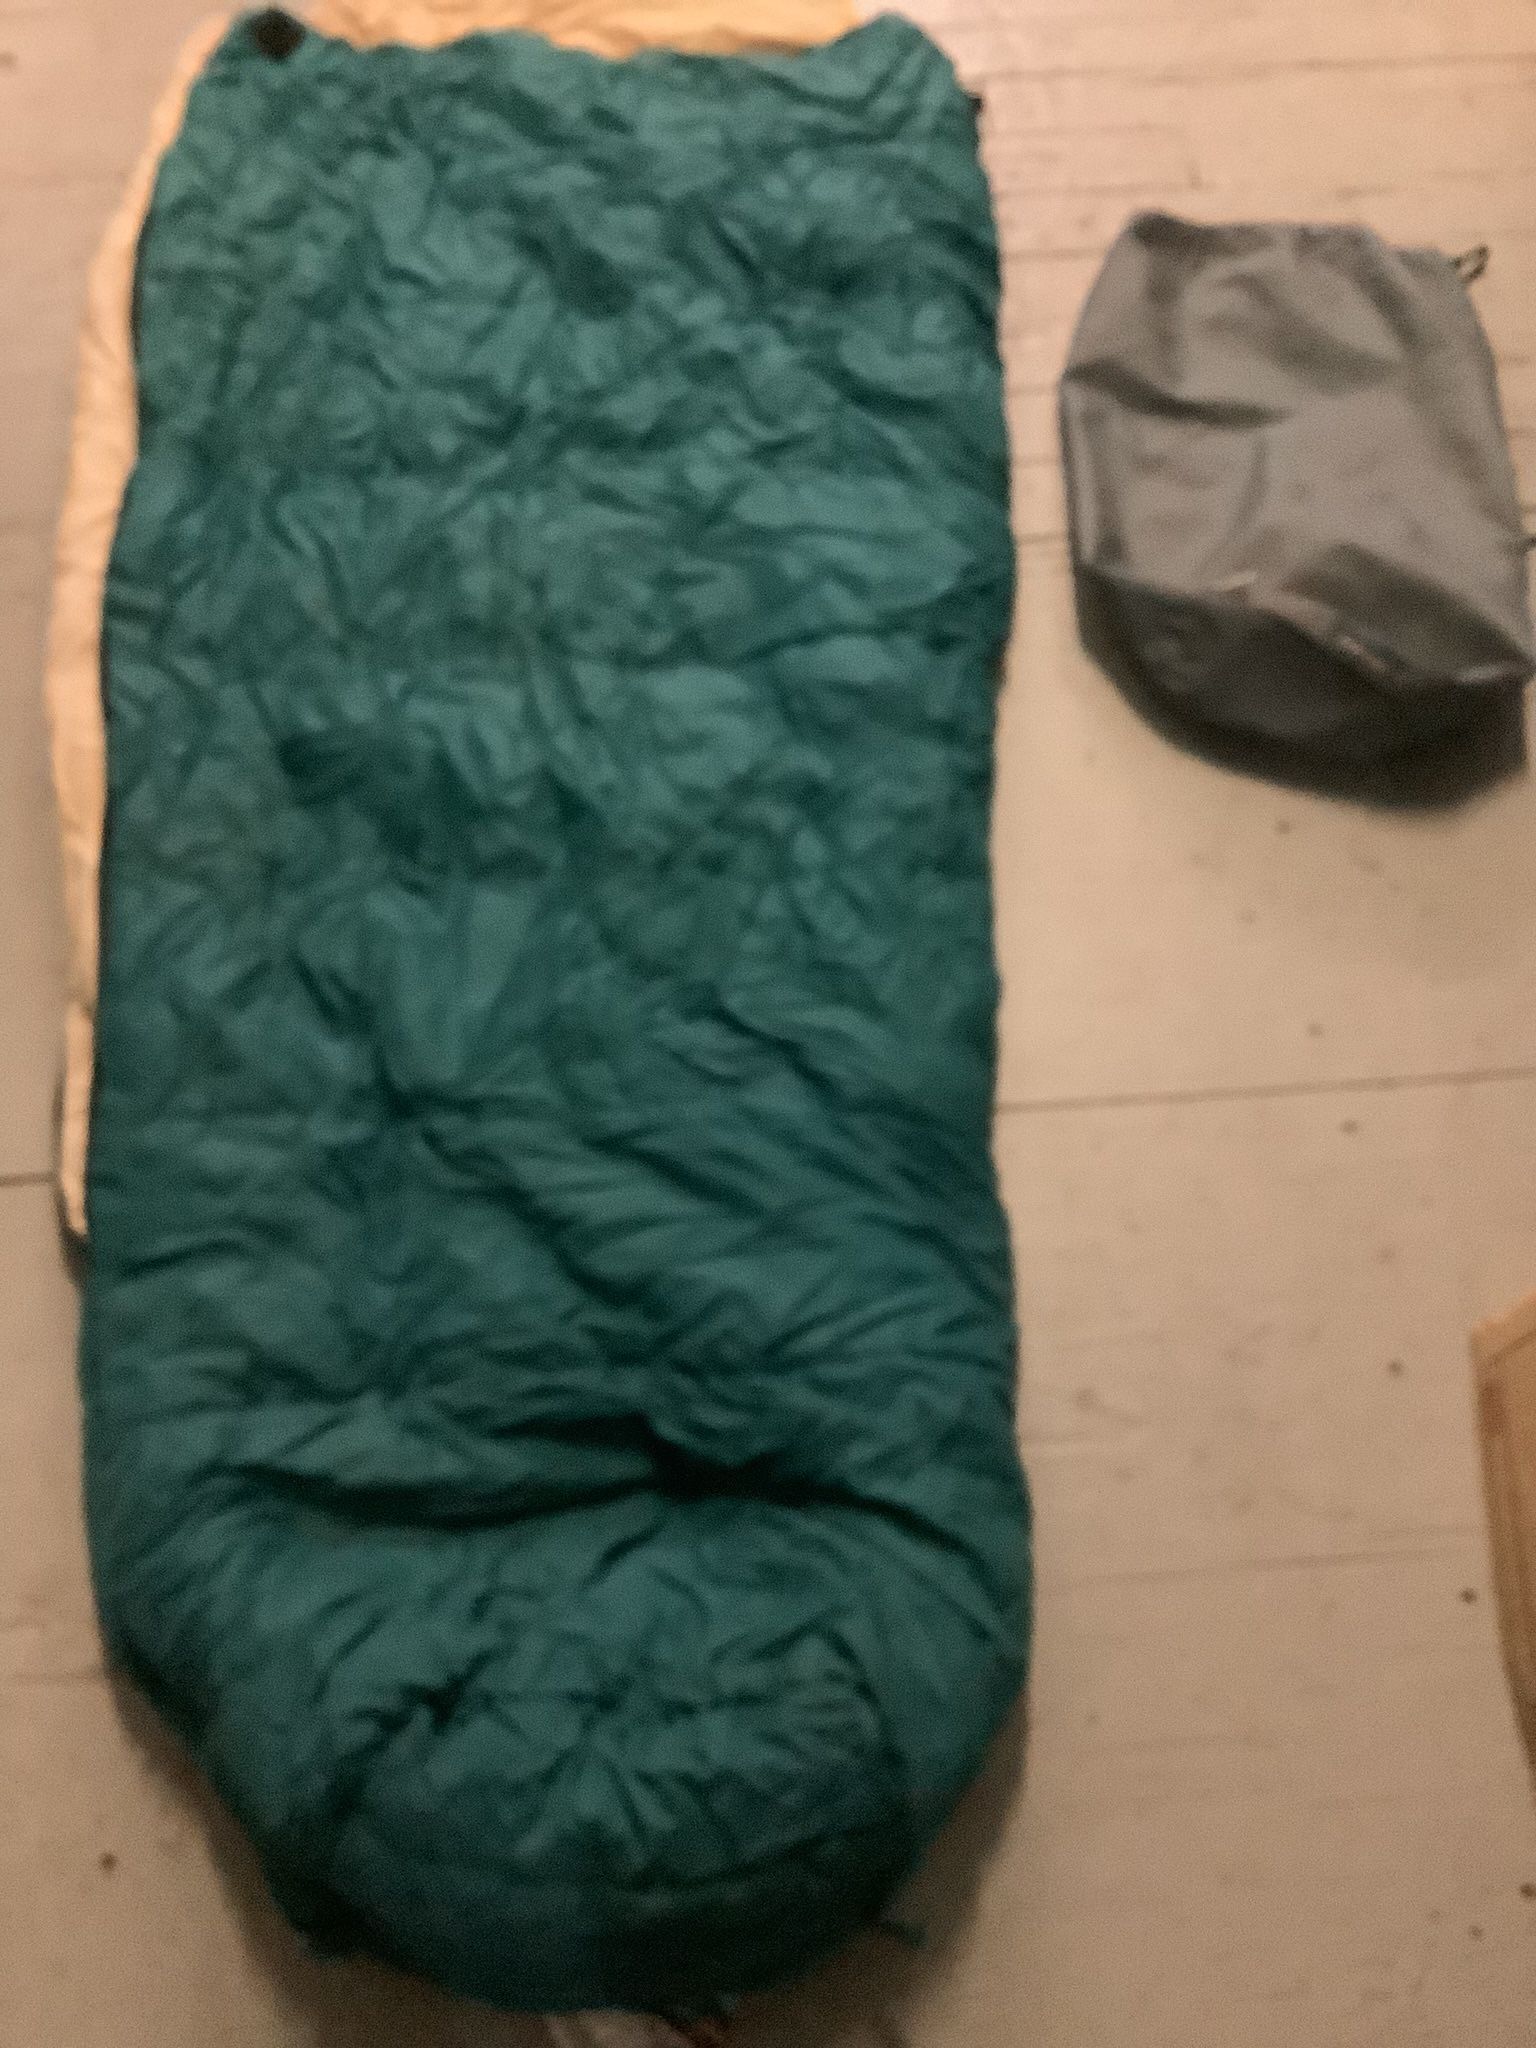 Used ,In Very Good Condition Sleeping Bag 